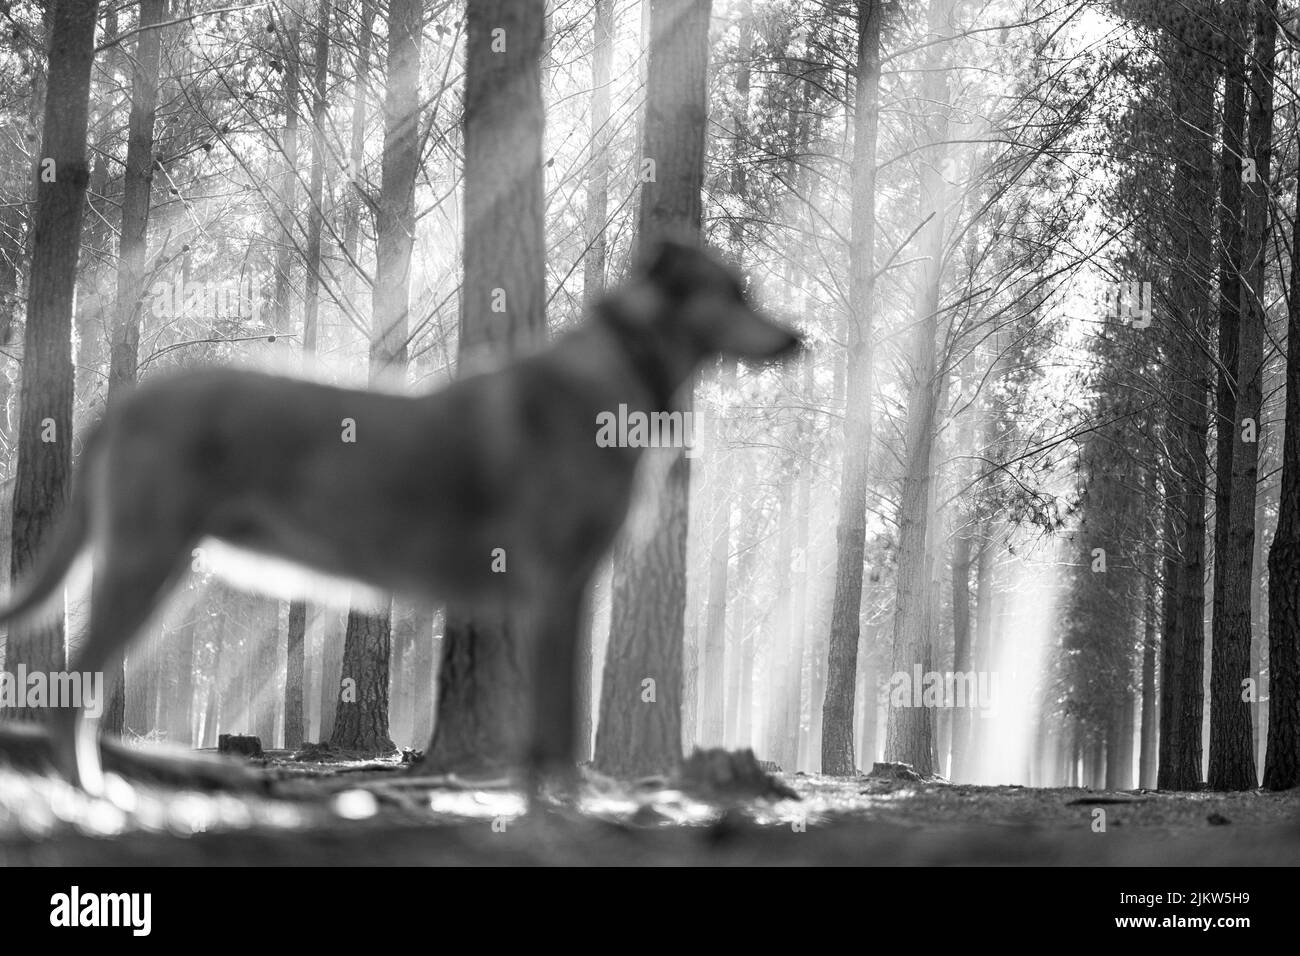 A shallow focus low angle view of the leafless trees under the sunlight and a dog standing in the foreground shot in grayscale Stock Photo